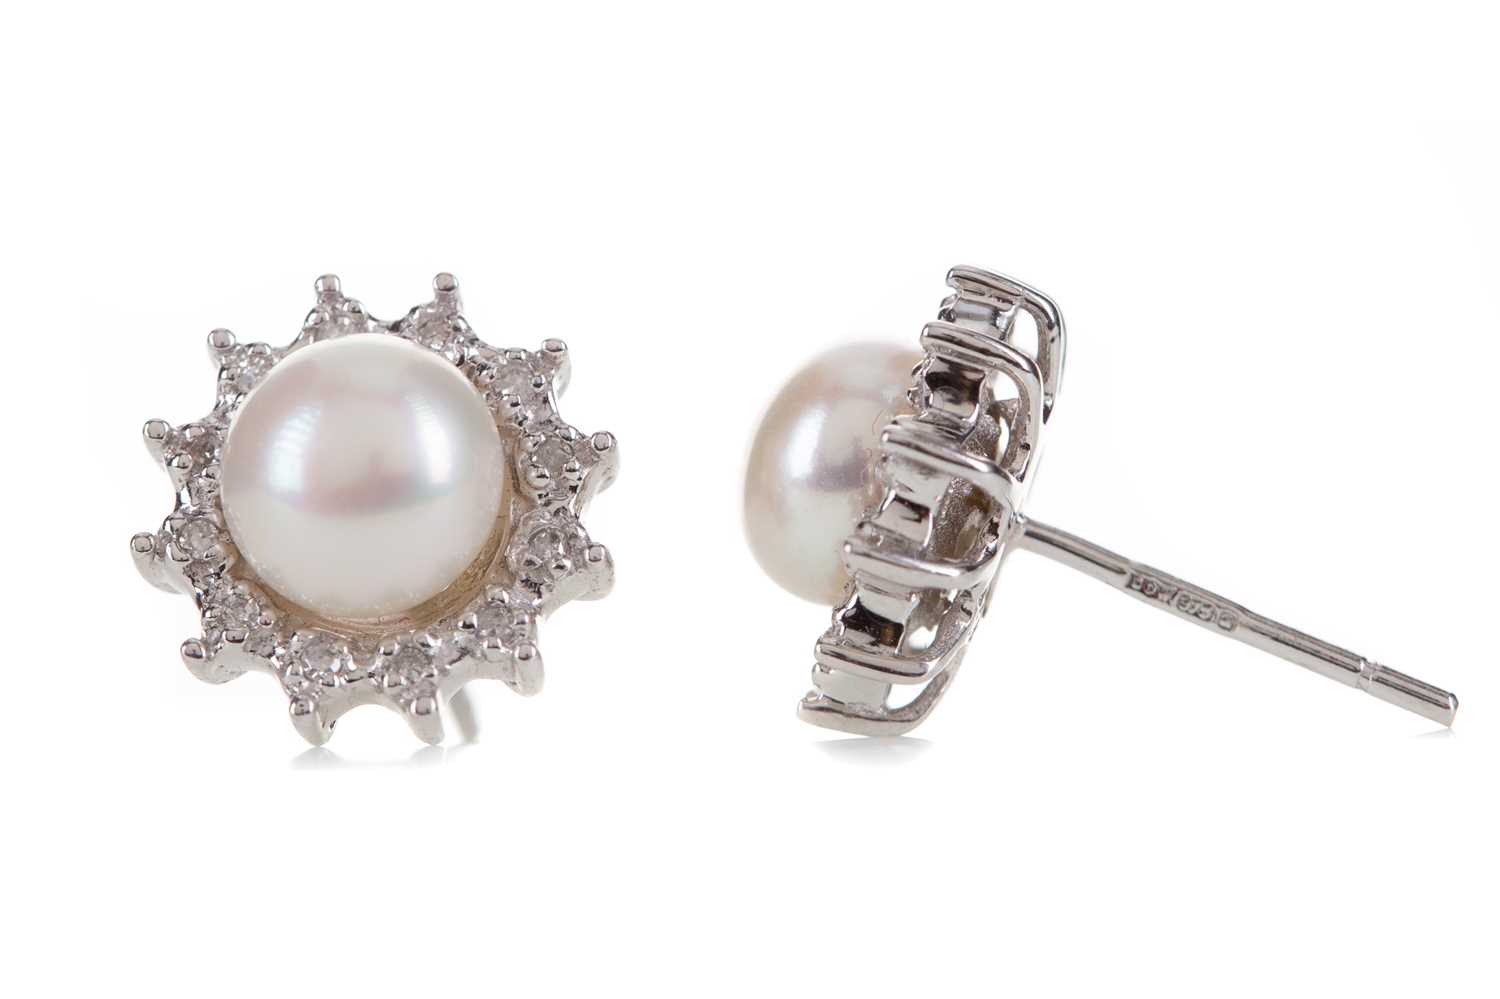 Lot 440 - A PAIR OF PEARL AND DIAMOND EARRINGS